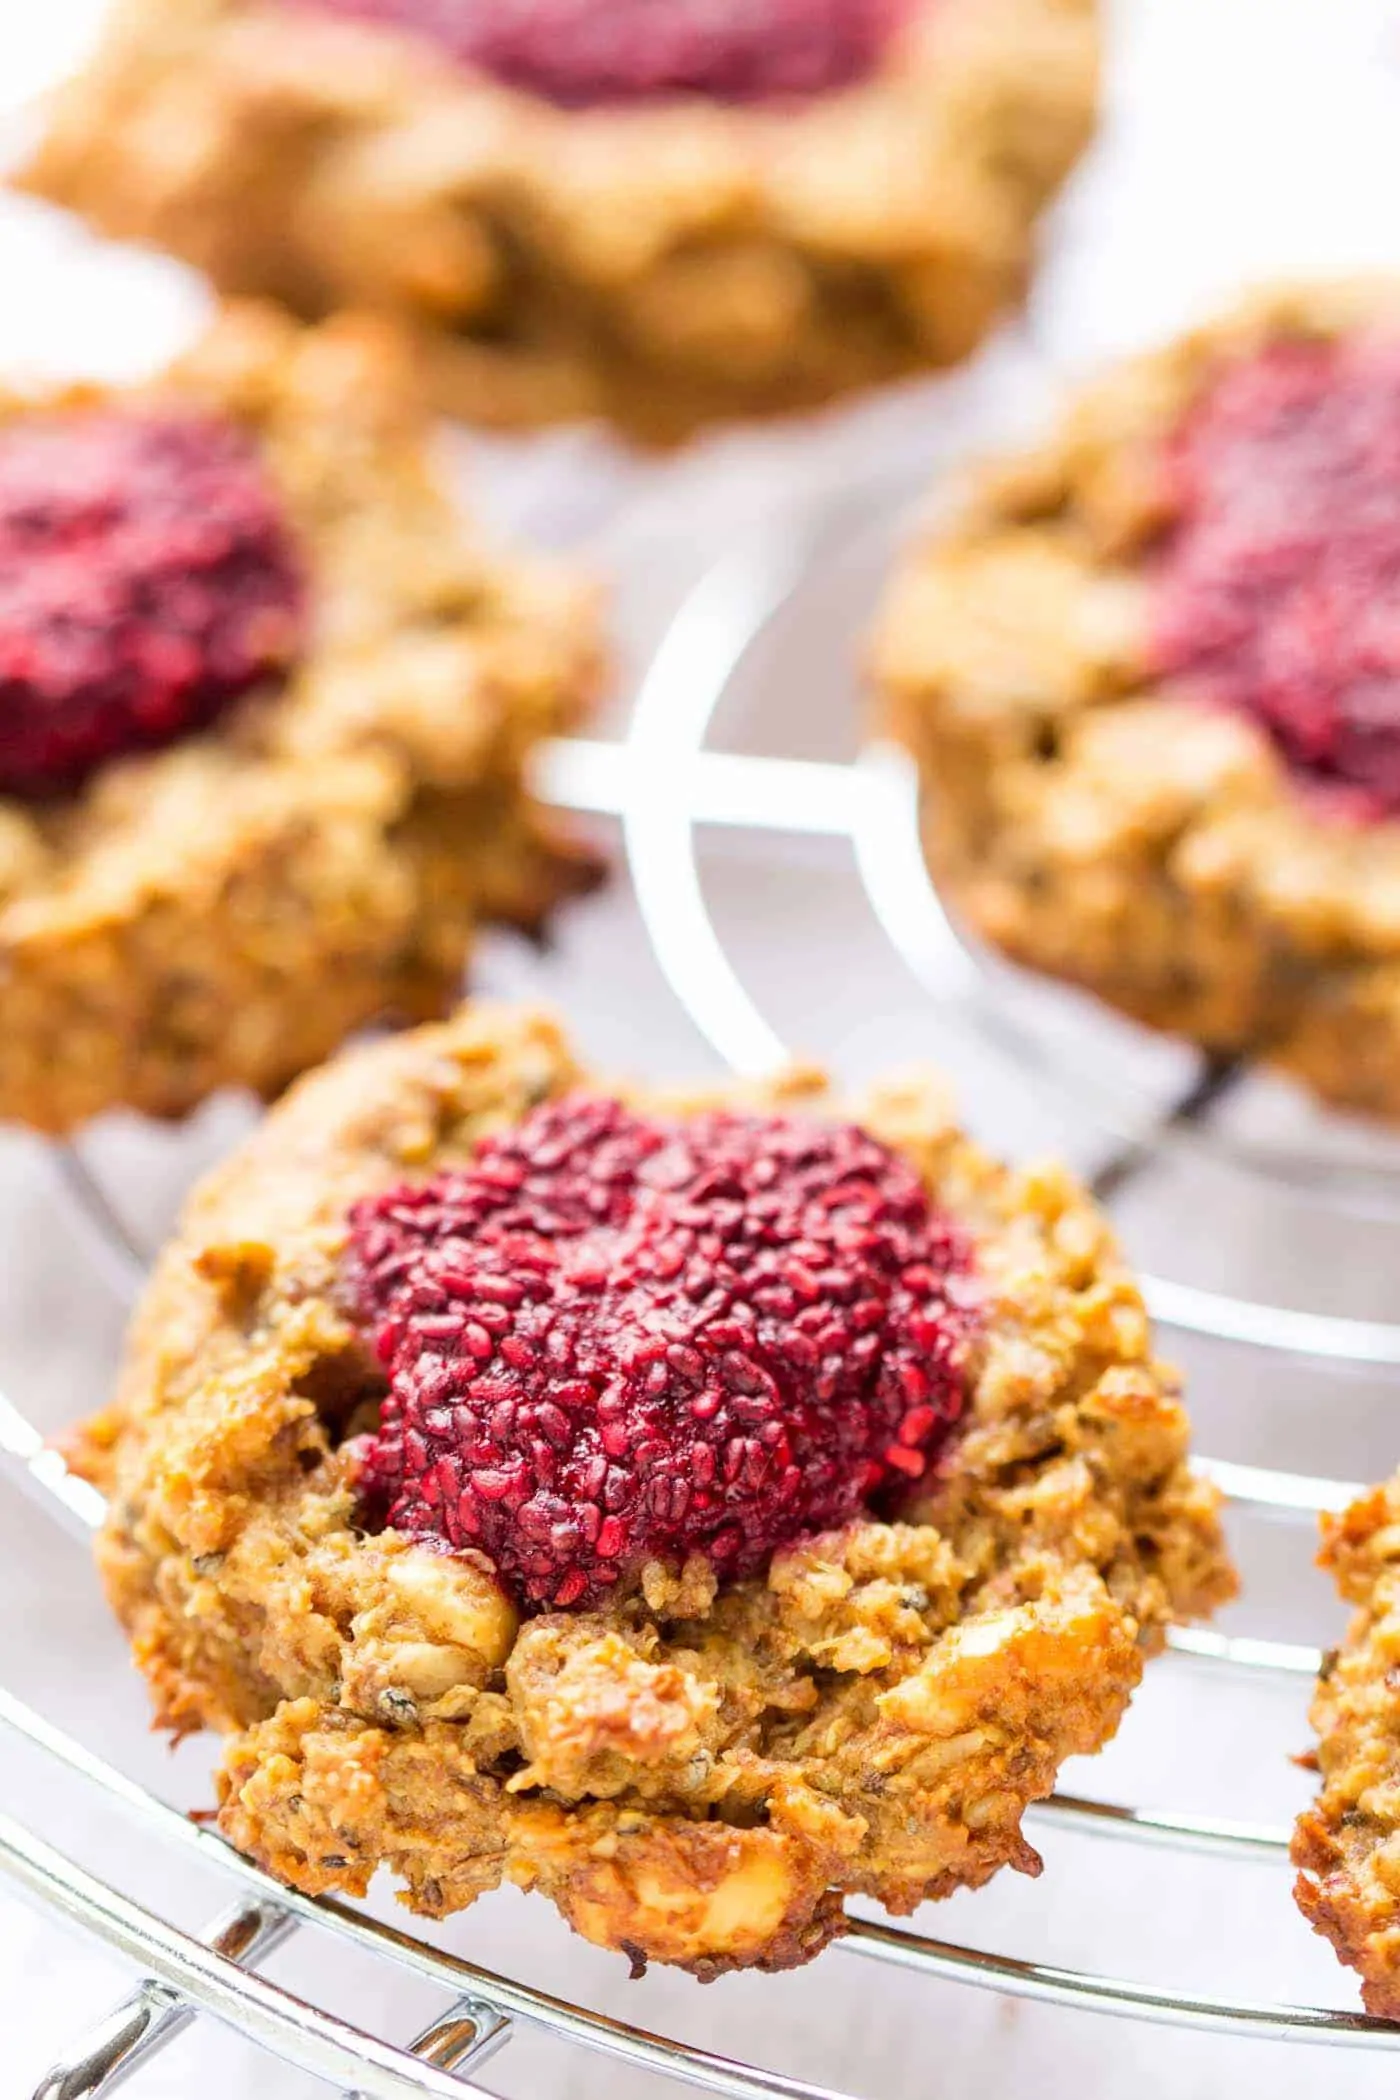 PB + J QUINOA BREAKFAST COOKIES -- a healthy way to start the day with a classic flavor combination [vegan]